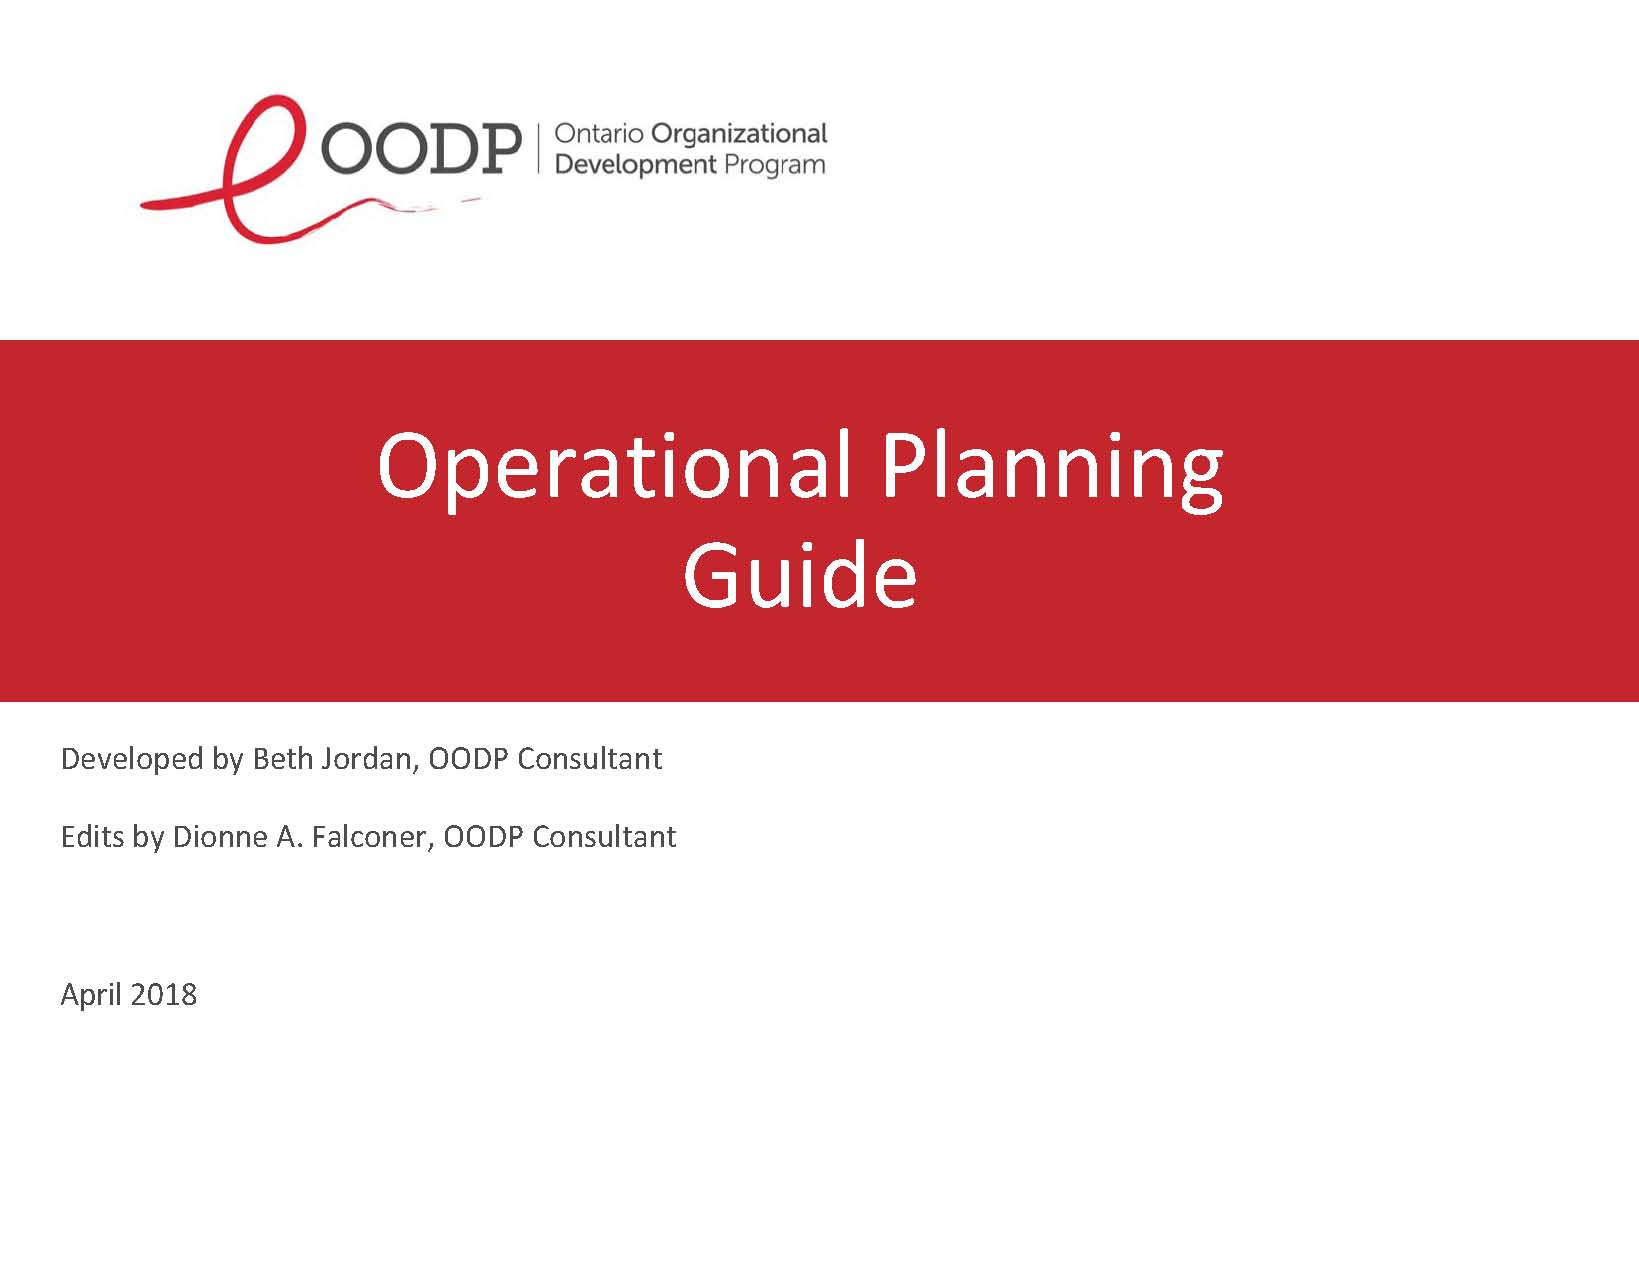 OODP Operational Planning Guide